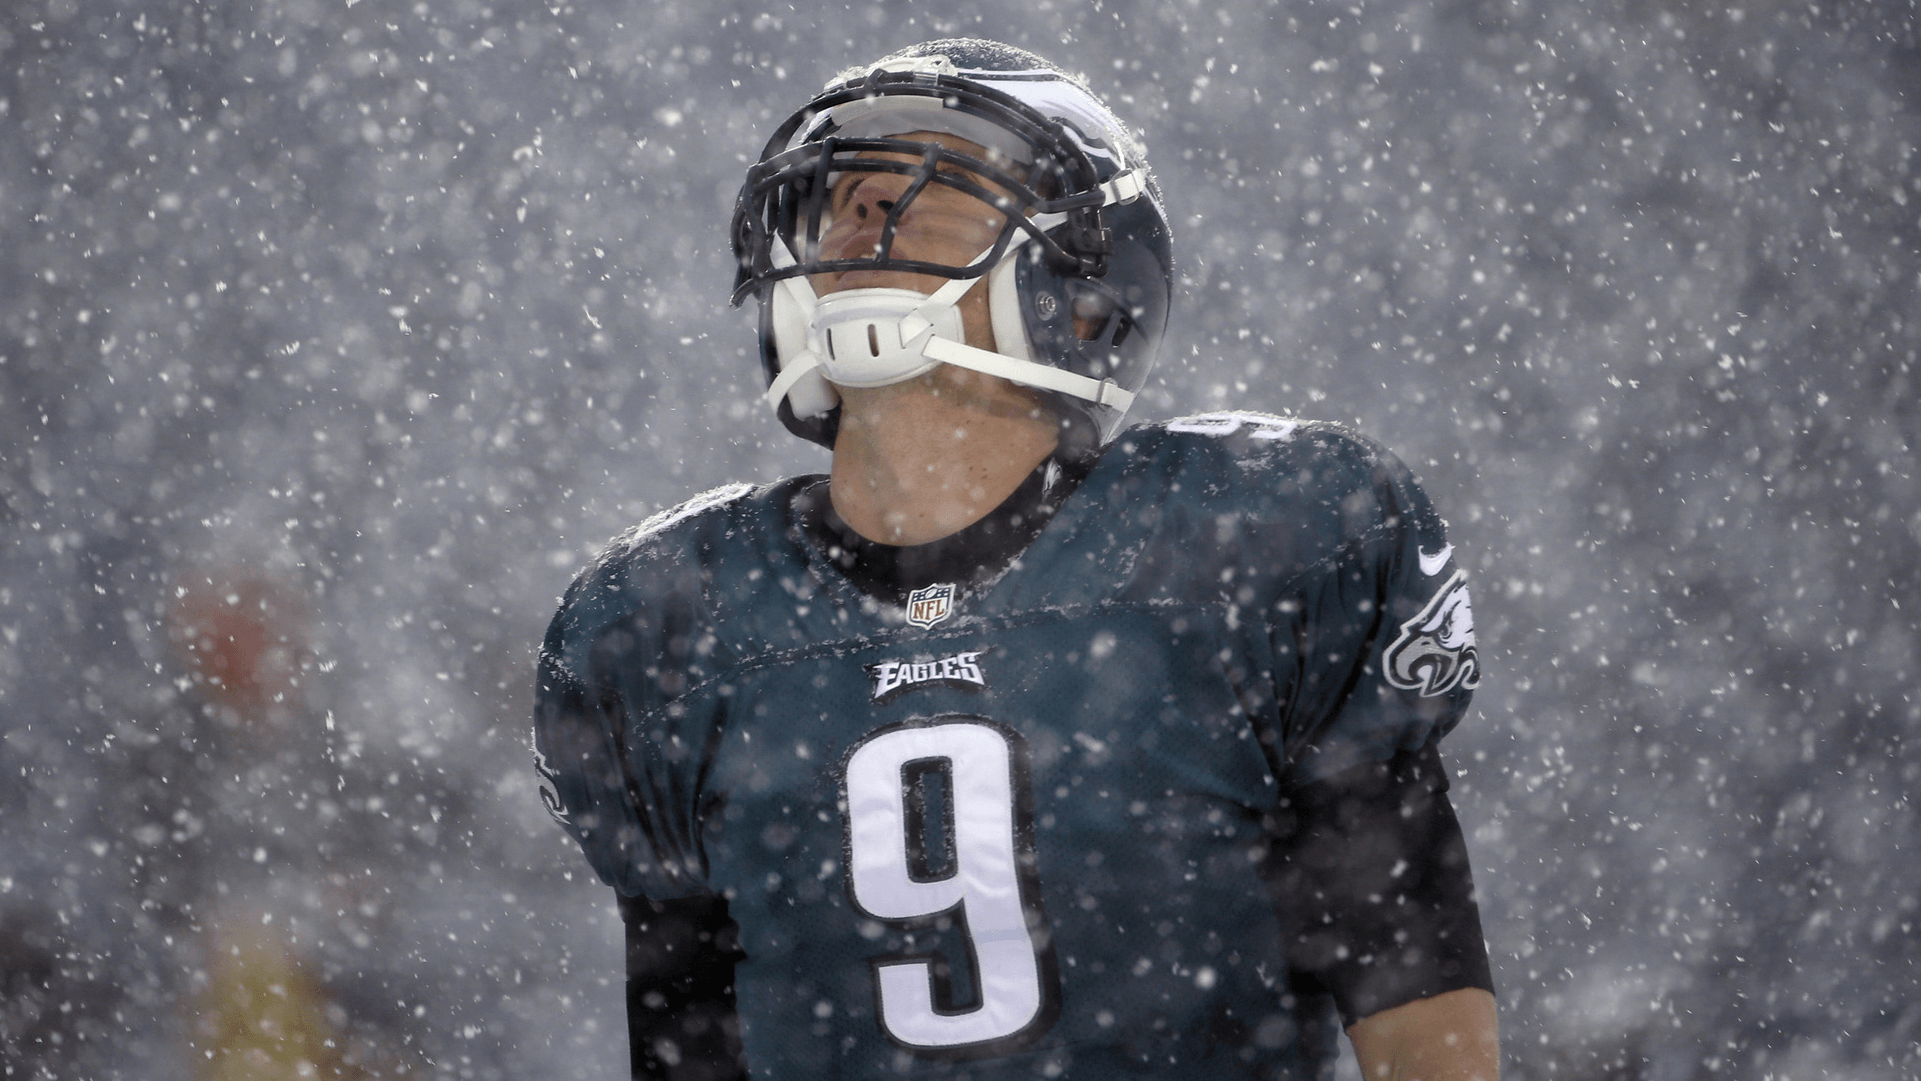 Foles Wallpaper I had saved from the Snow Bowl, figured some